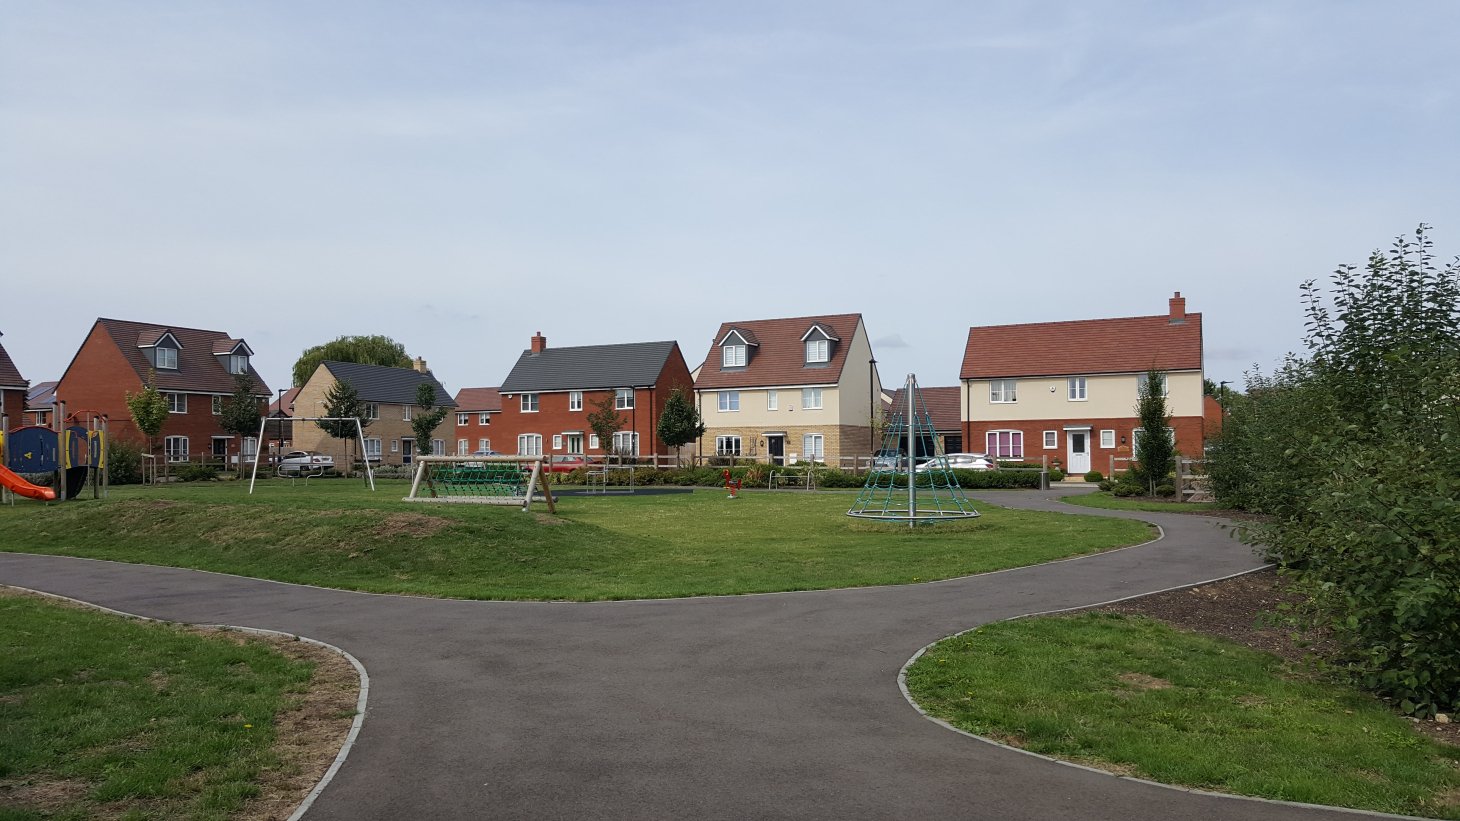  Government focus on shared ownership  